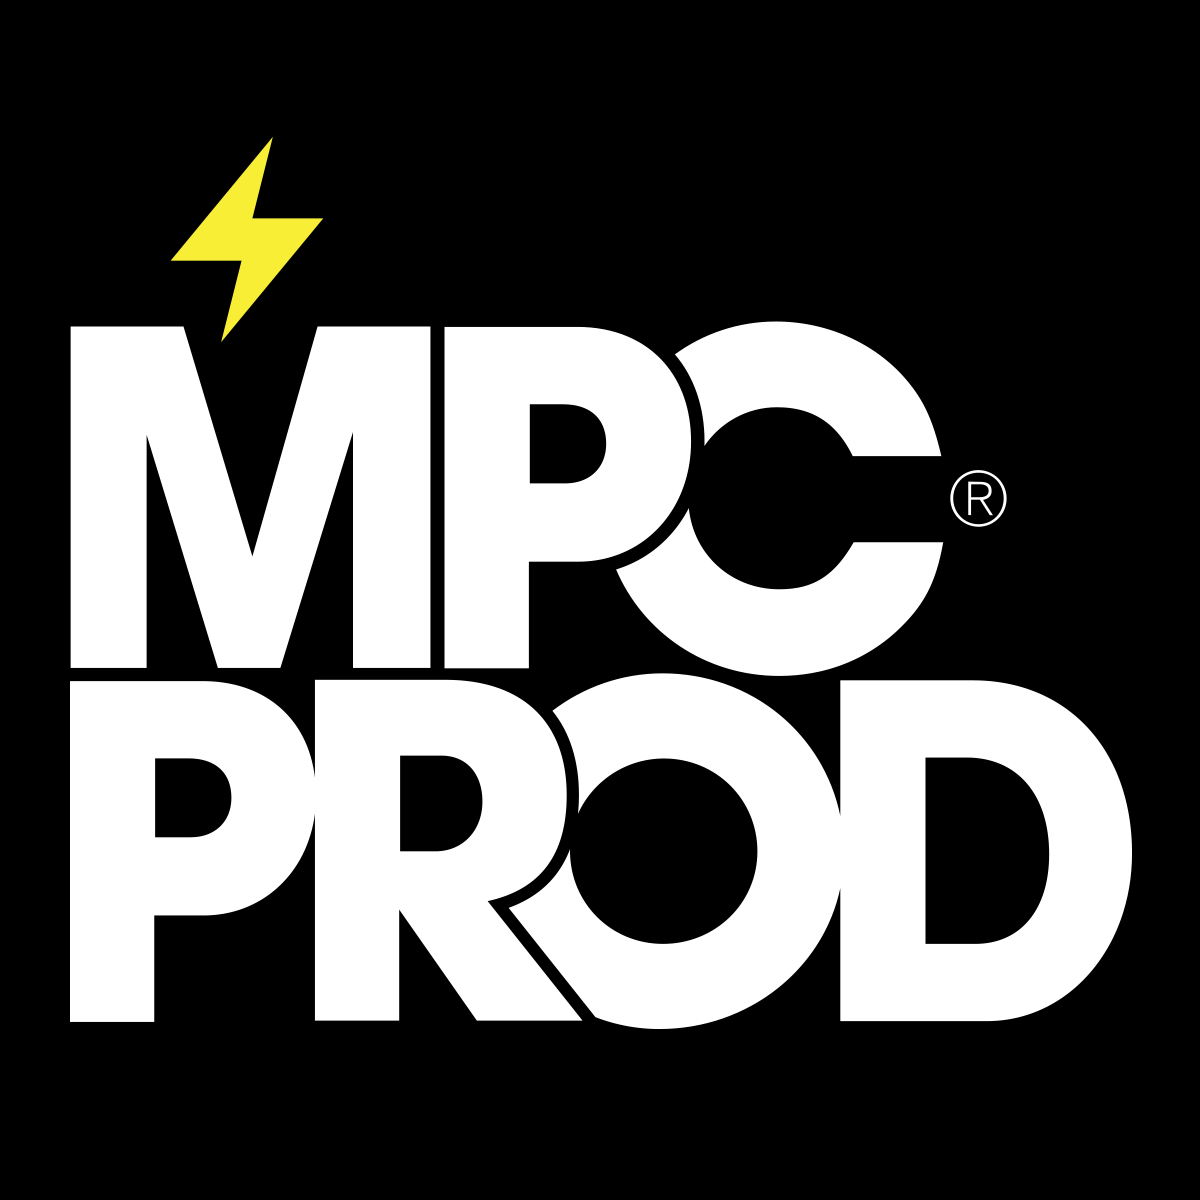 download the new version for windows MPC-BE 1.6.9